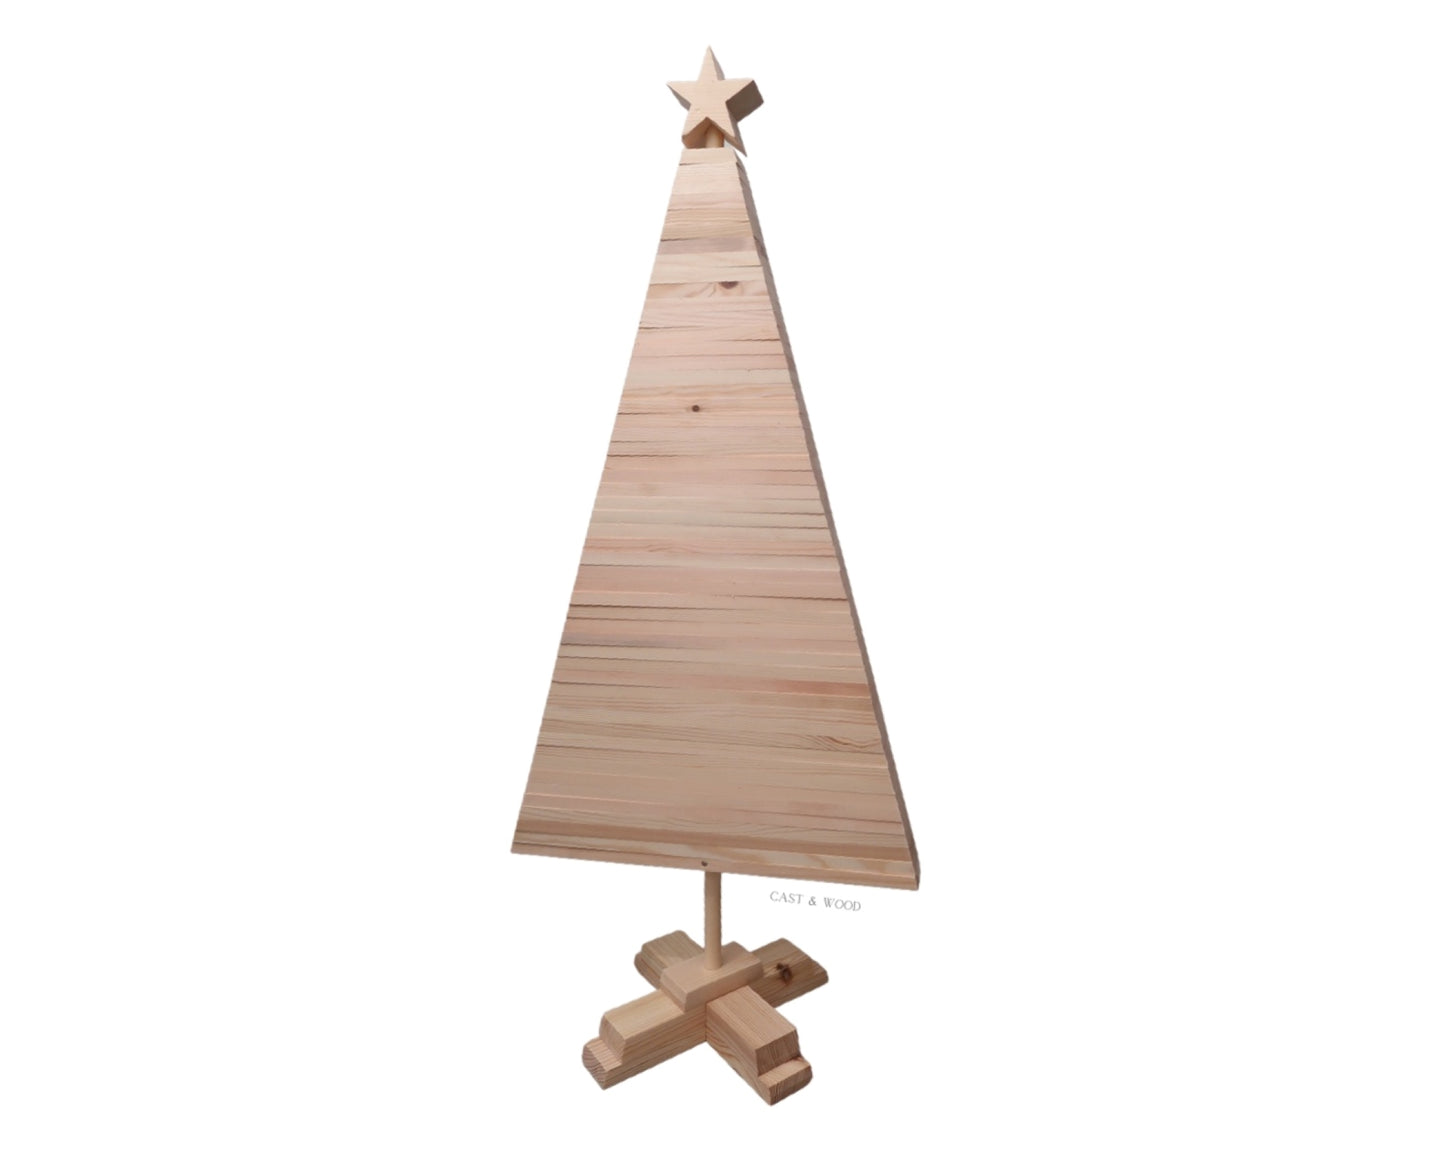 Large Wooden Christmas Tree - 100cm